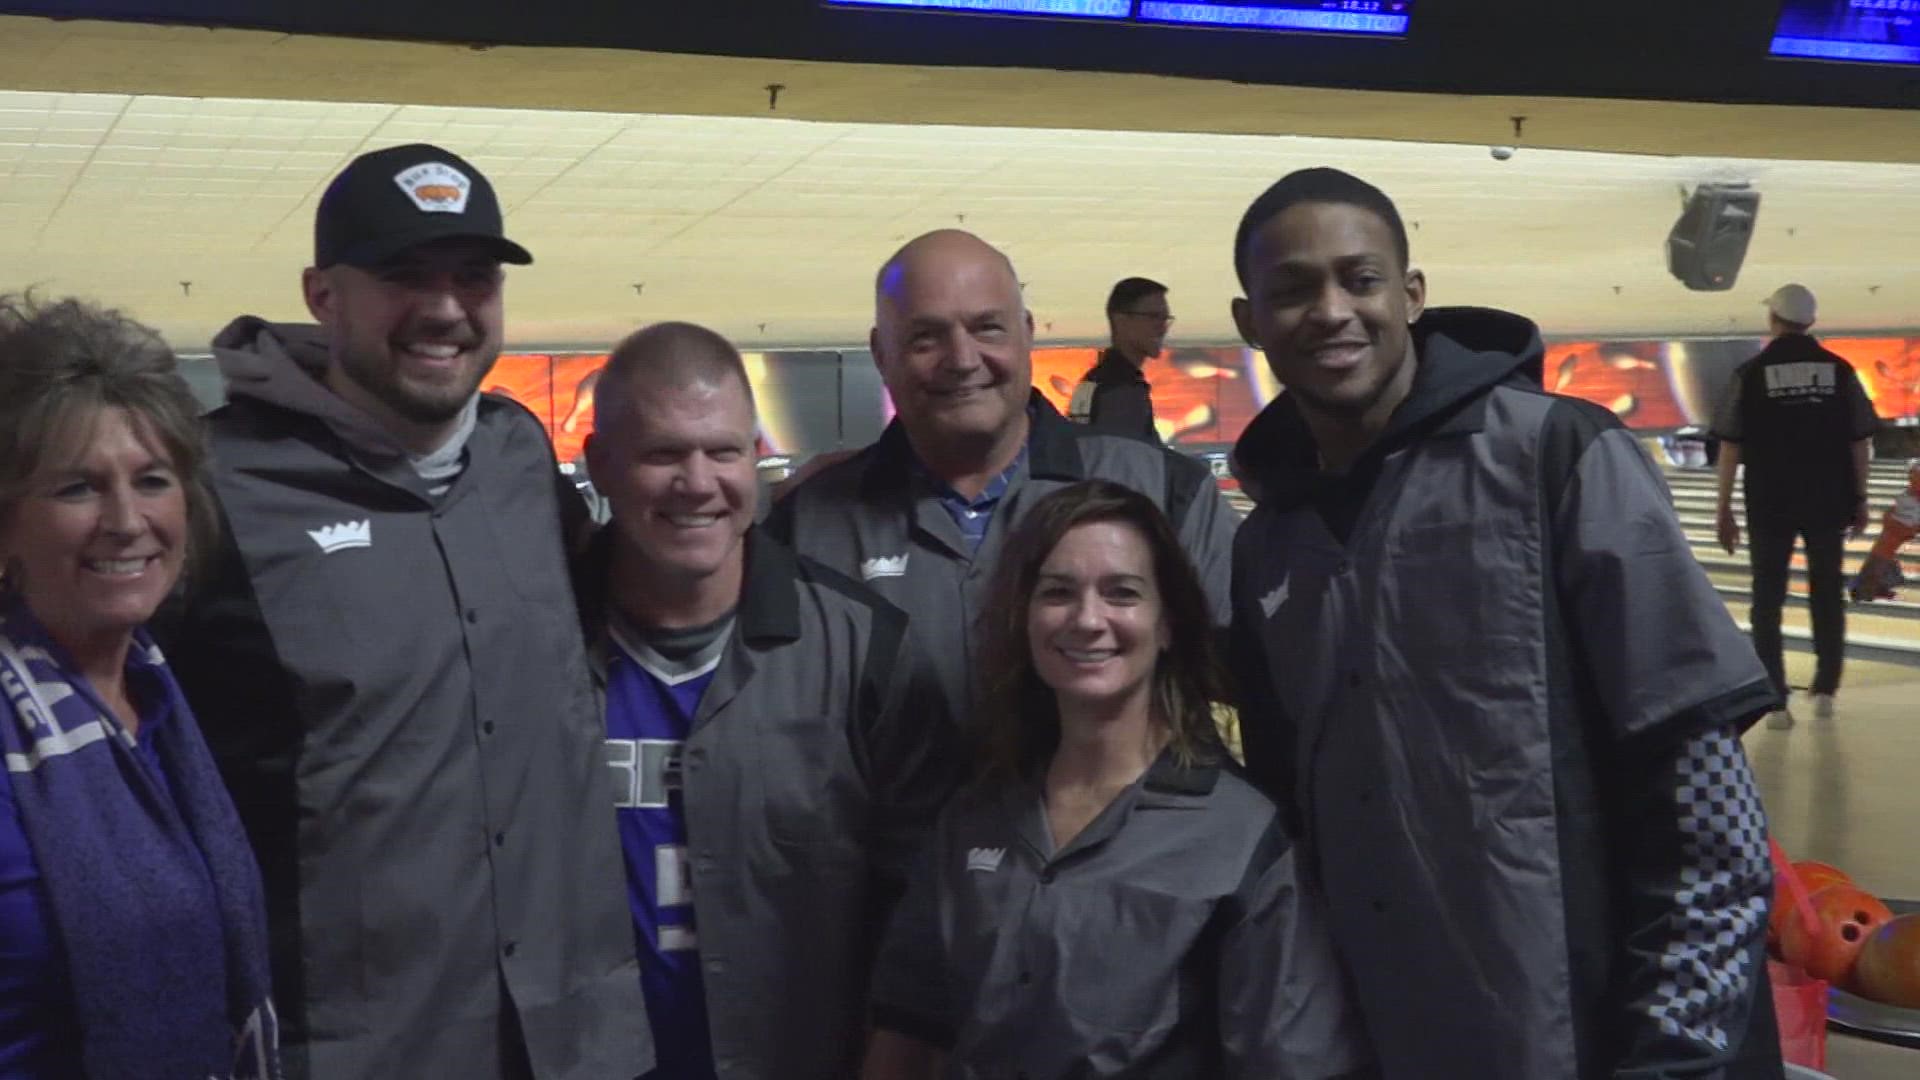 The Sacramento Kings held their Kingpin Classic charity events, where fans bowled and mingle with players.